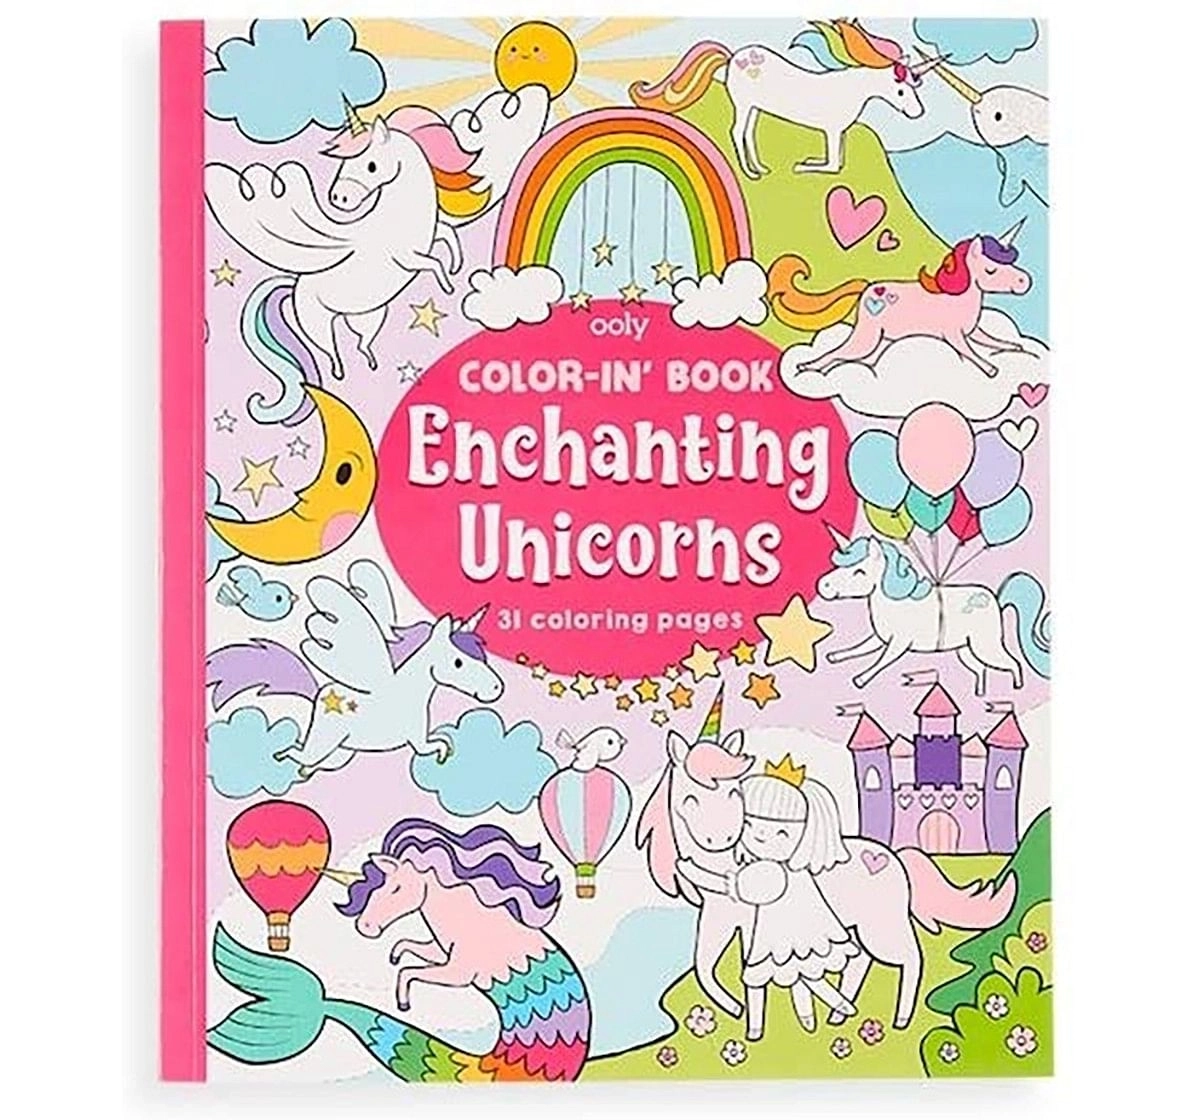 Ooly 31 Pages Enchanting Unicorns Colouring Book- Multicolour Books for Kids age 3Y+ 